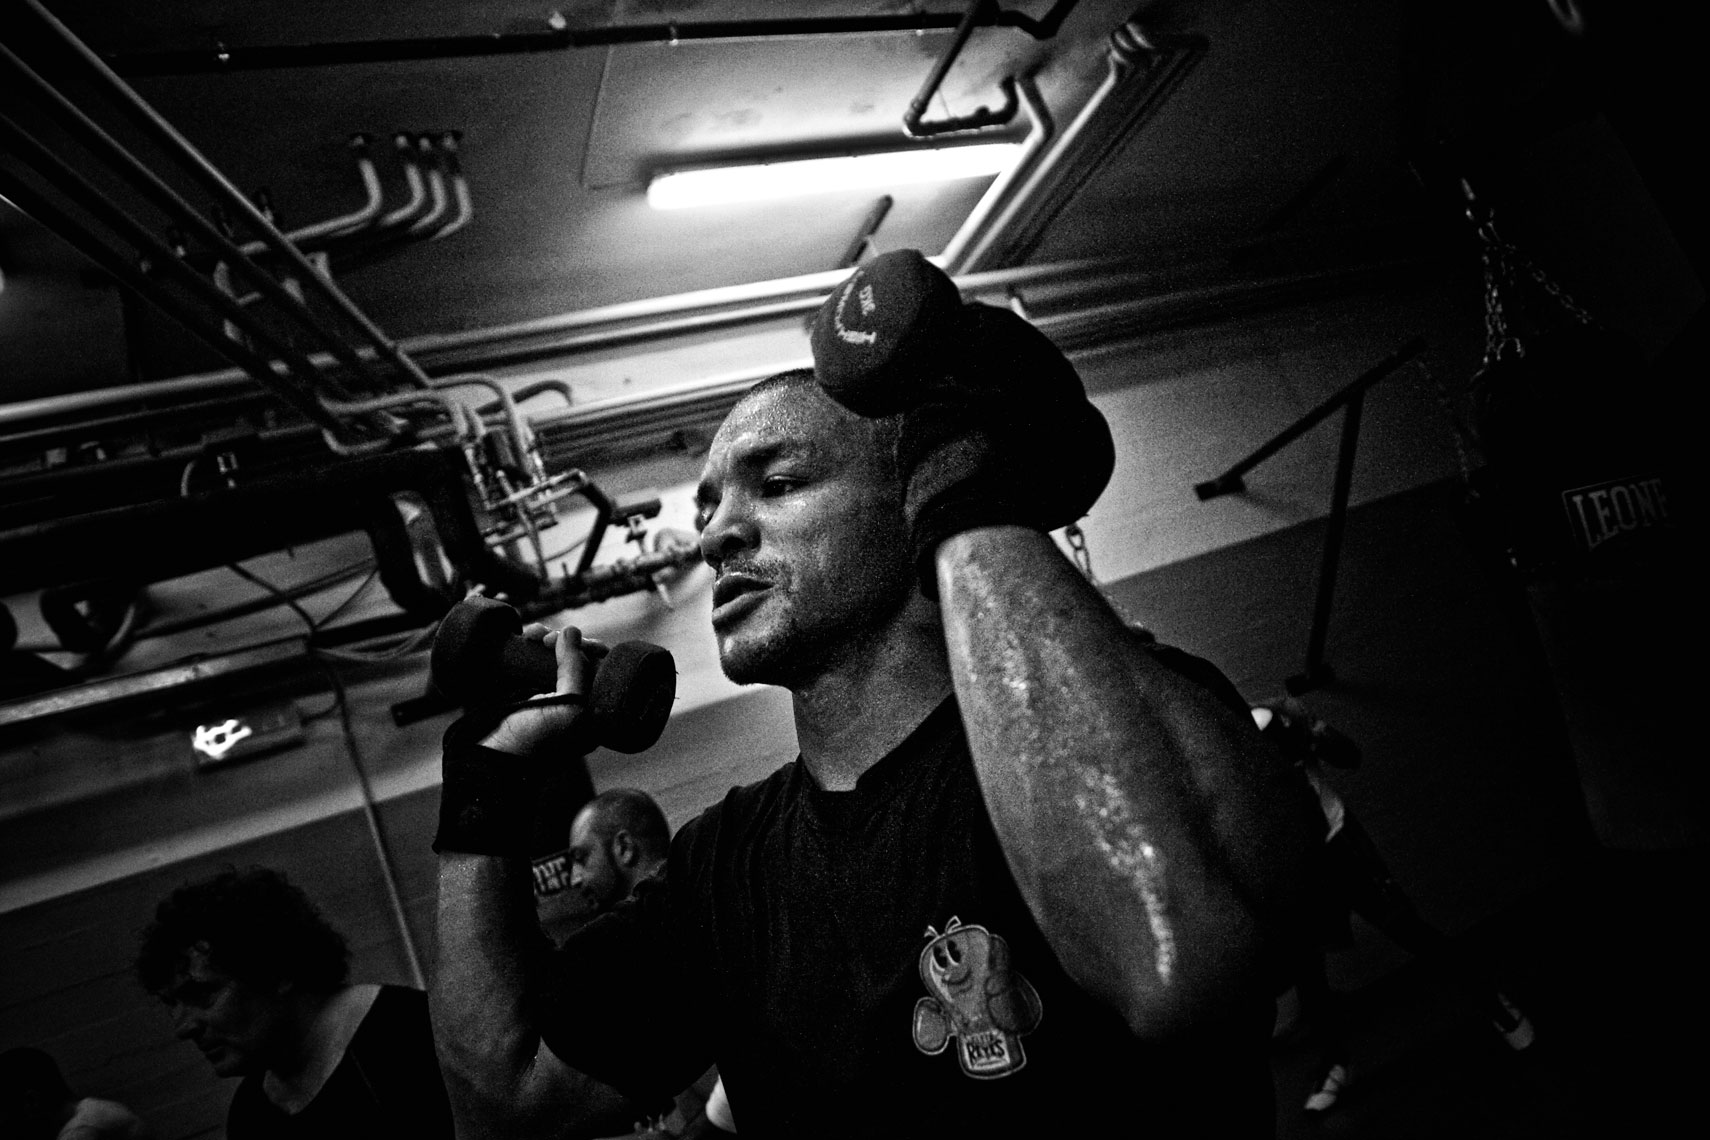 ITALY. Florence, 7th October 2011. Leonard Bundu during the training  in preparation of the match for the EBU (European Boxing Union) Welter Weight crown.